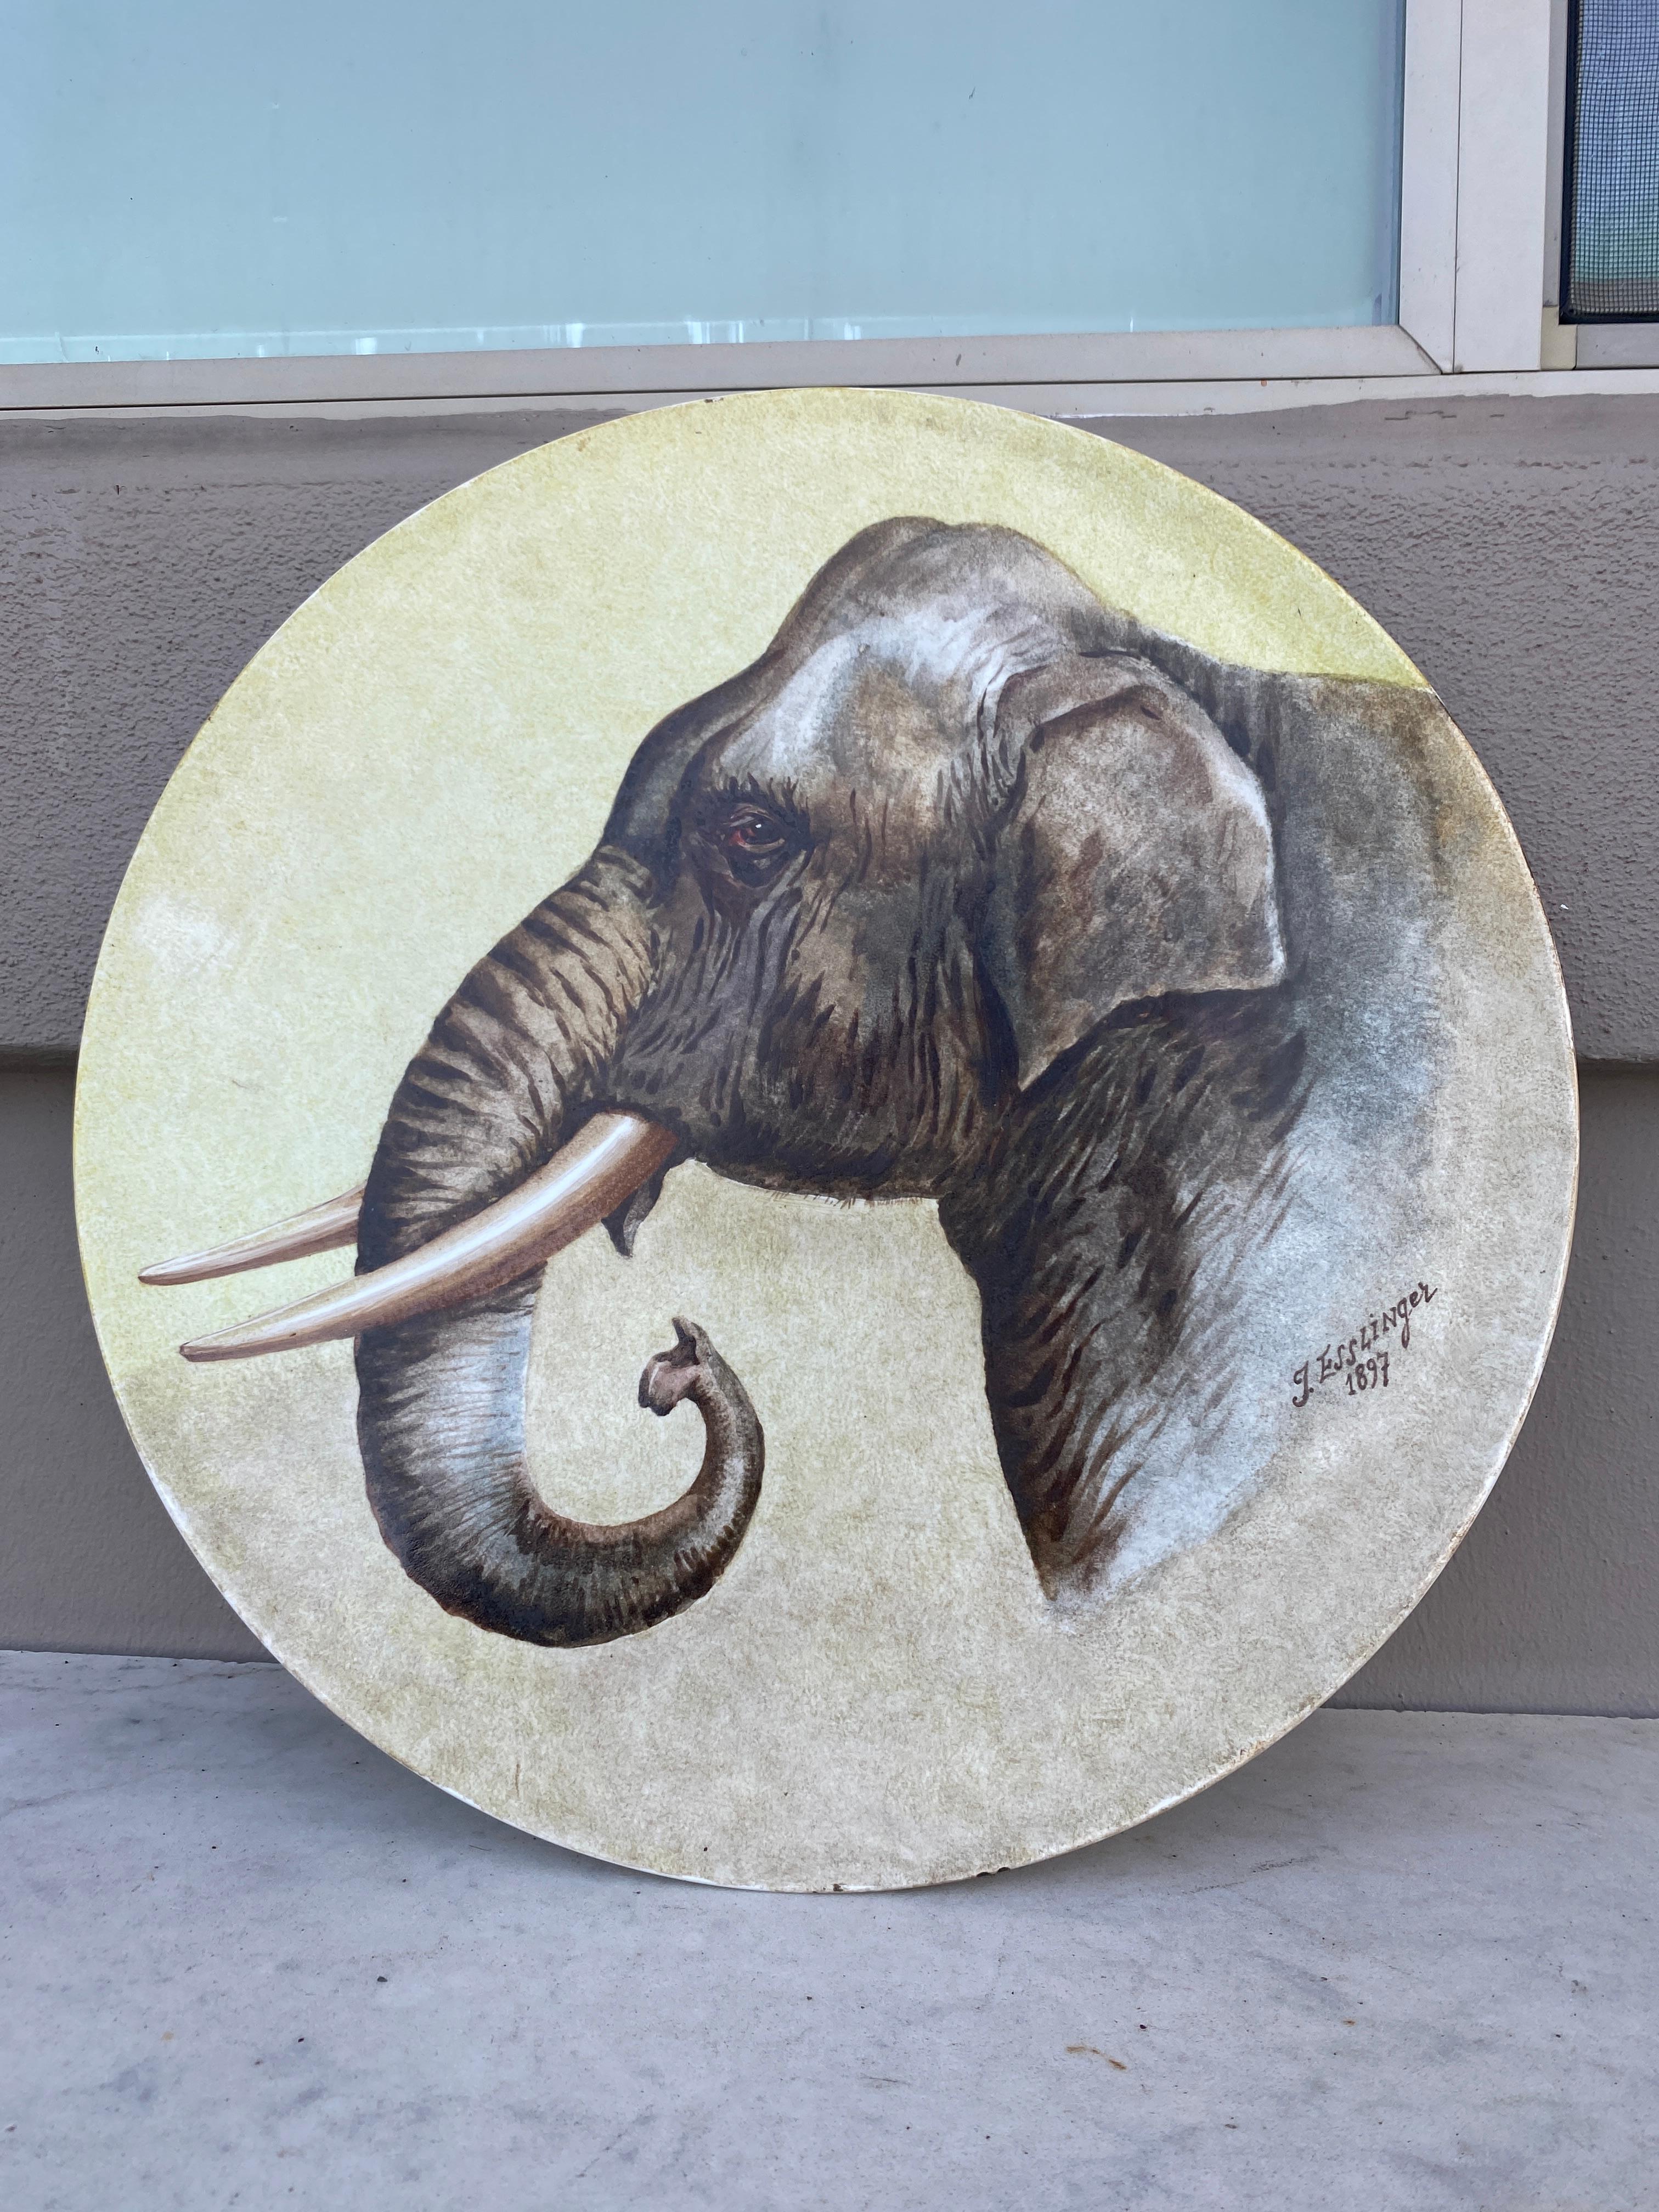 Large French Faience Elephant Platter signed J. Esslinger dated 1897.
Measure: 16 inches diameter.